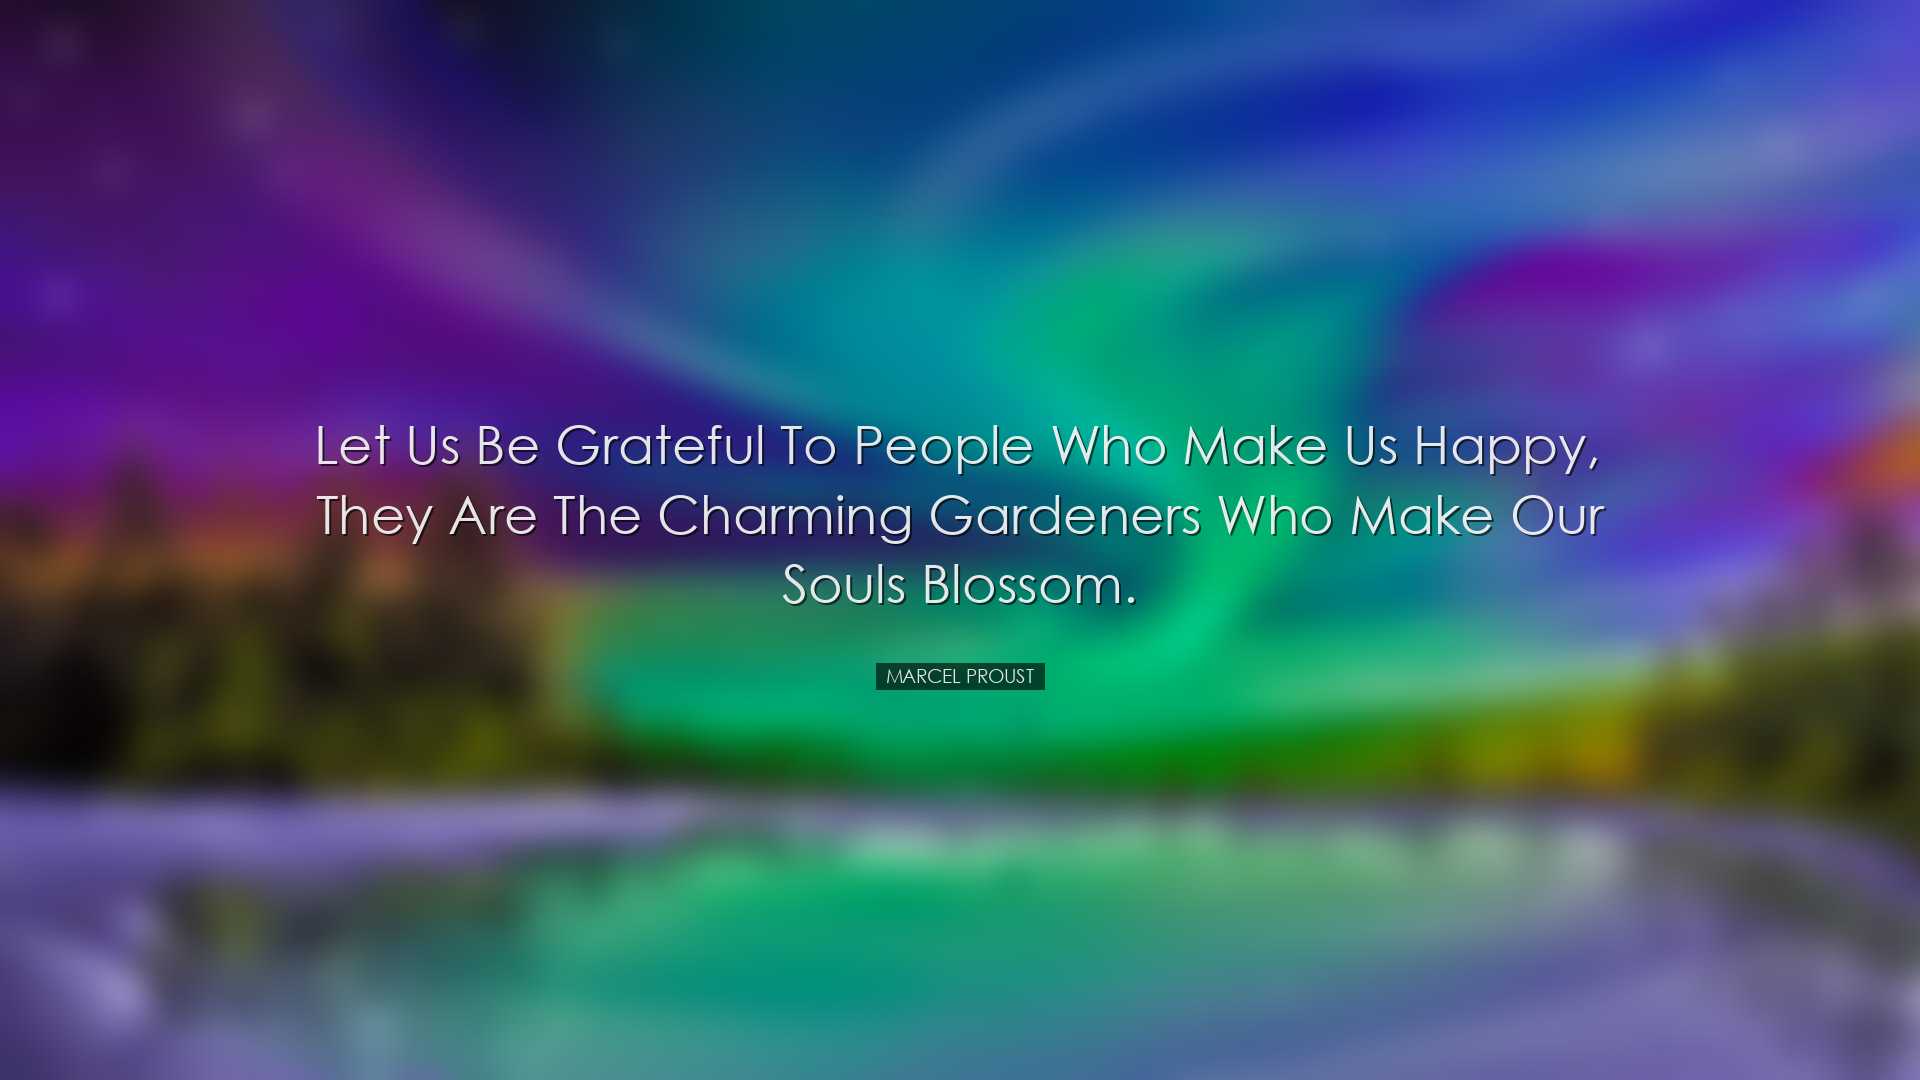 Let us be grateful to people who make us happy, they are the charm